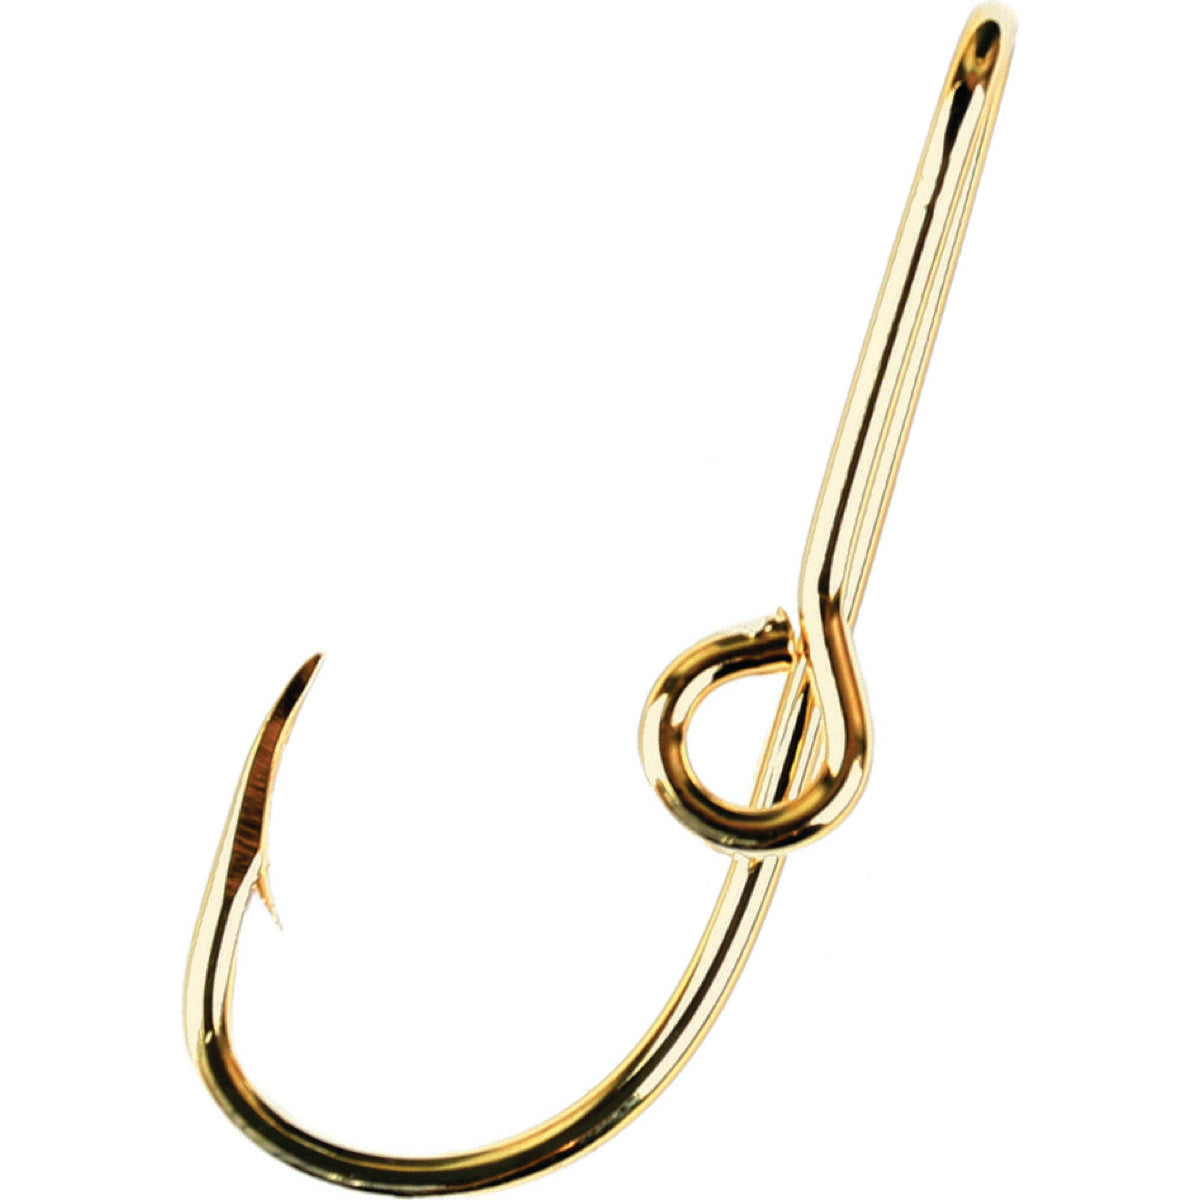 Photo of Eagle Claw Hat/Tie Clip Gold Plated for sale at United Tackle Shops.